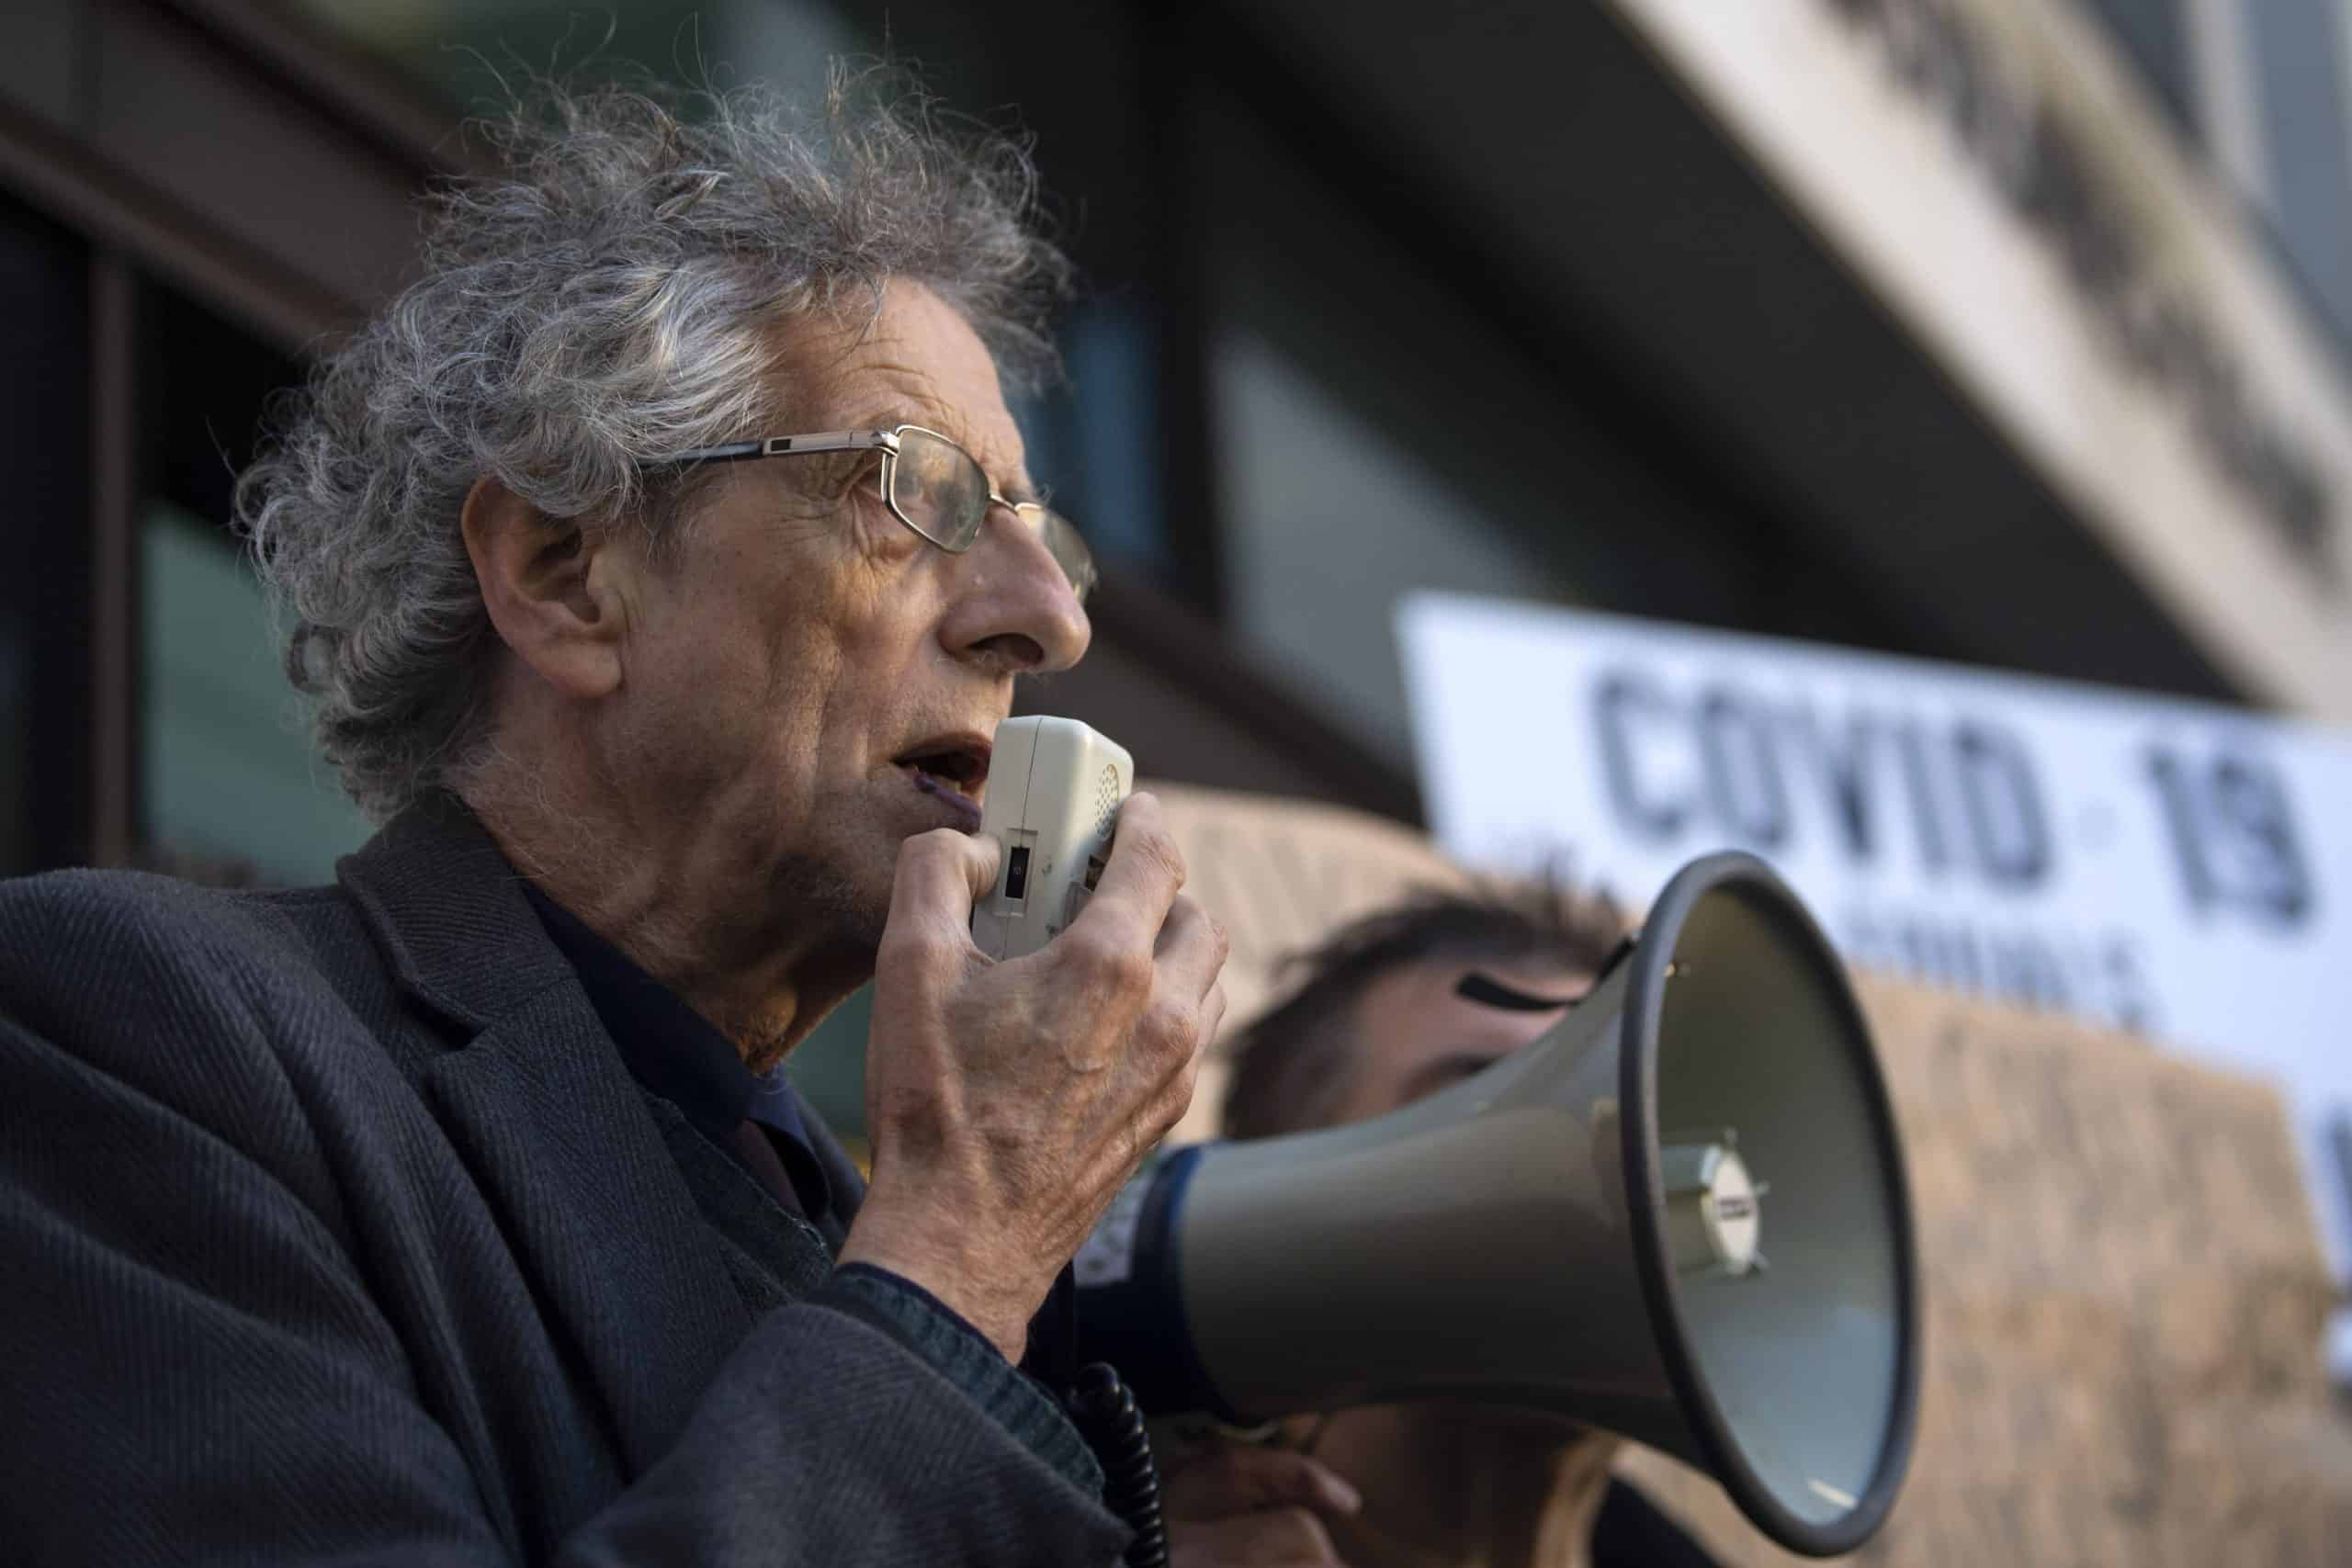 Piers Corbyn facing investigation over leaflets comparing vaccines to Auschwitz